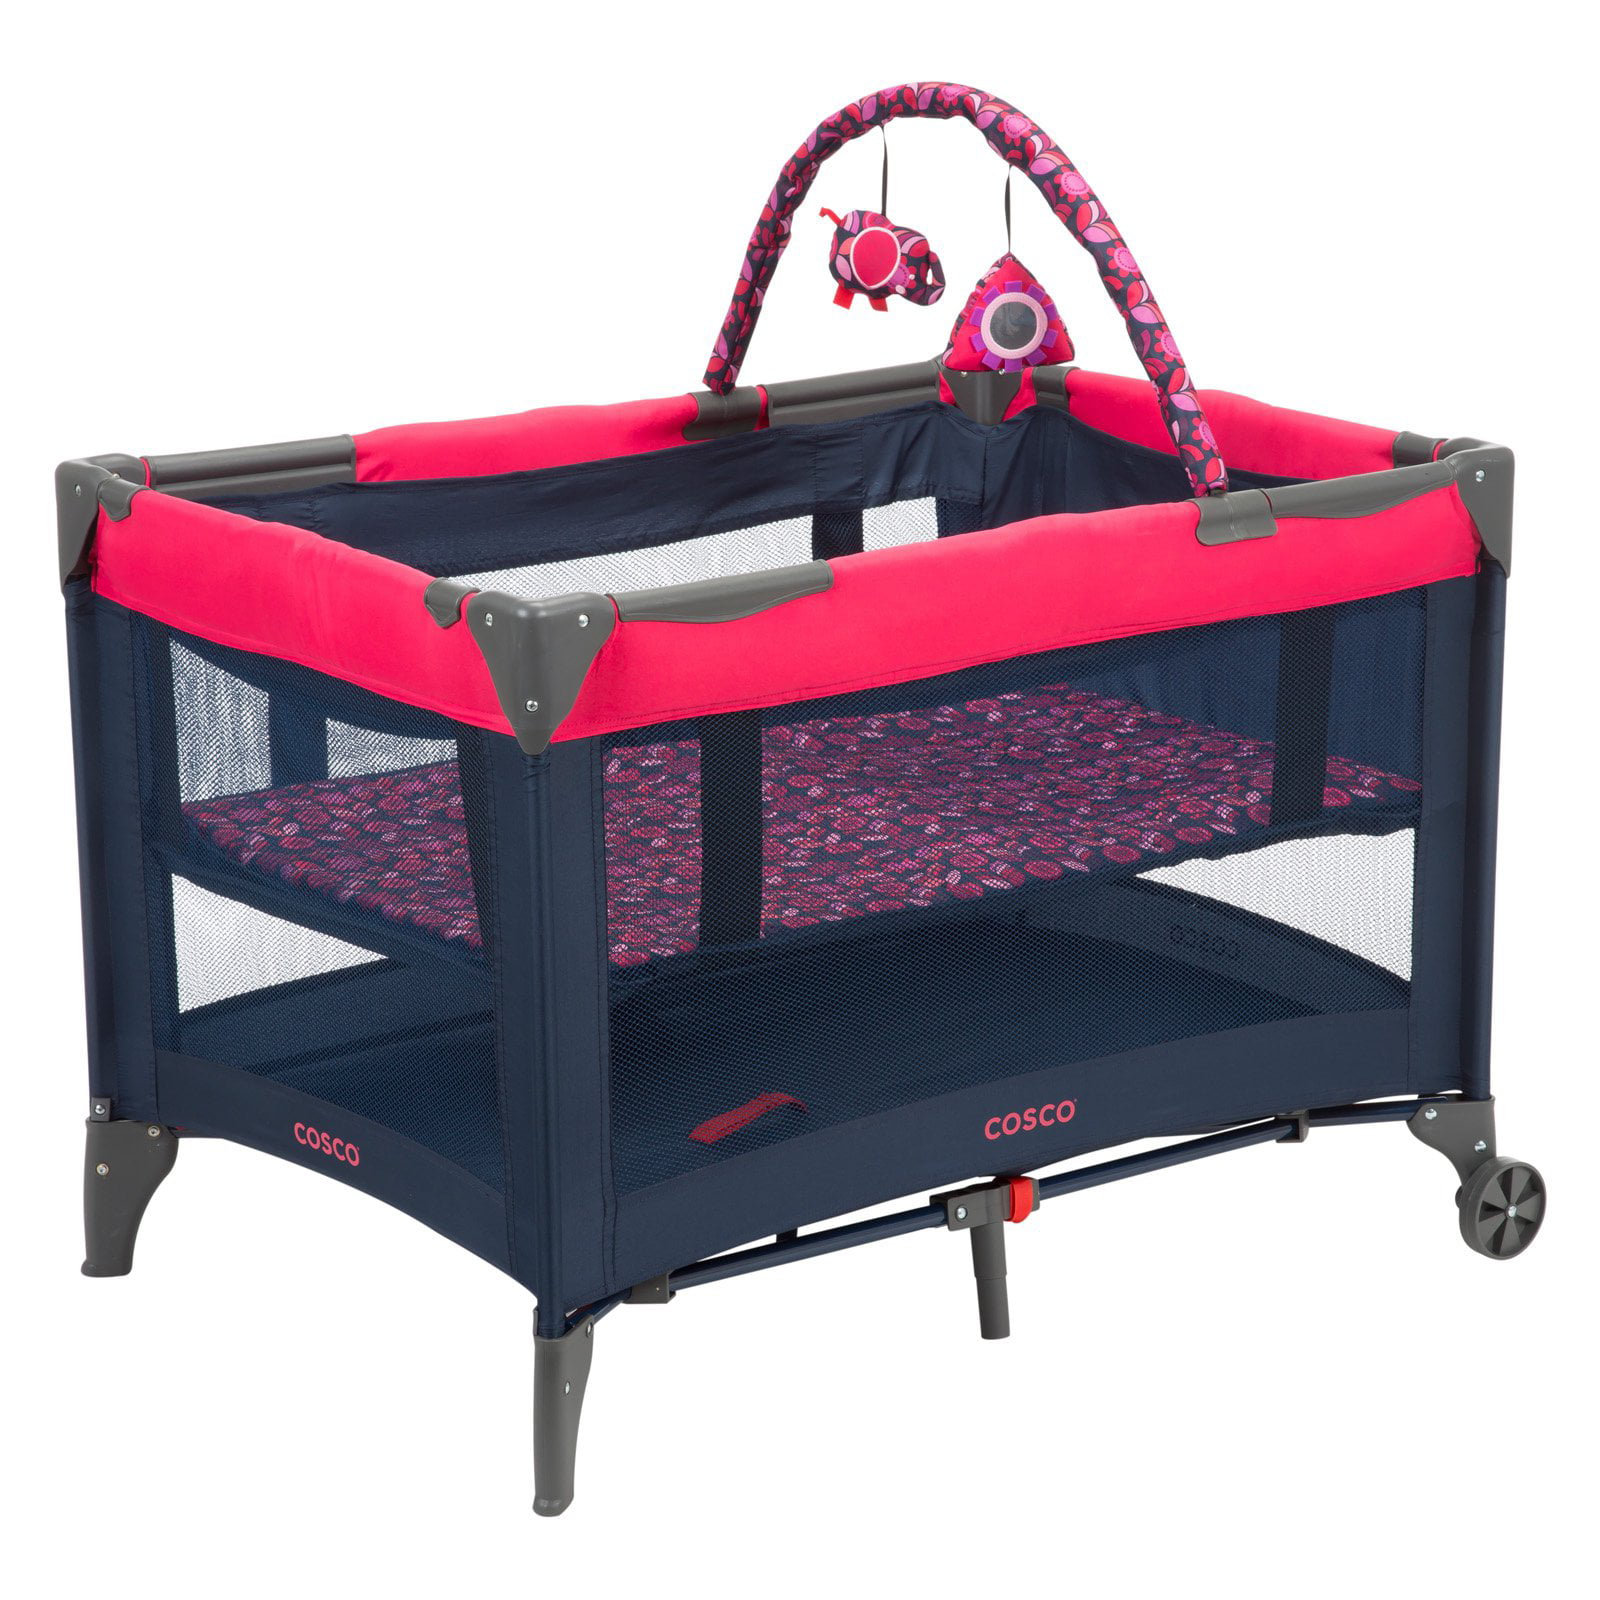 Cosco Funsport Deluxe Play Yard 